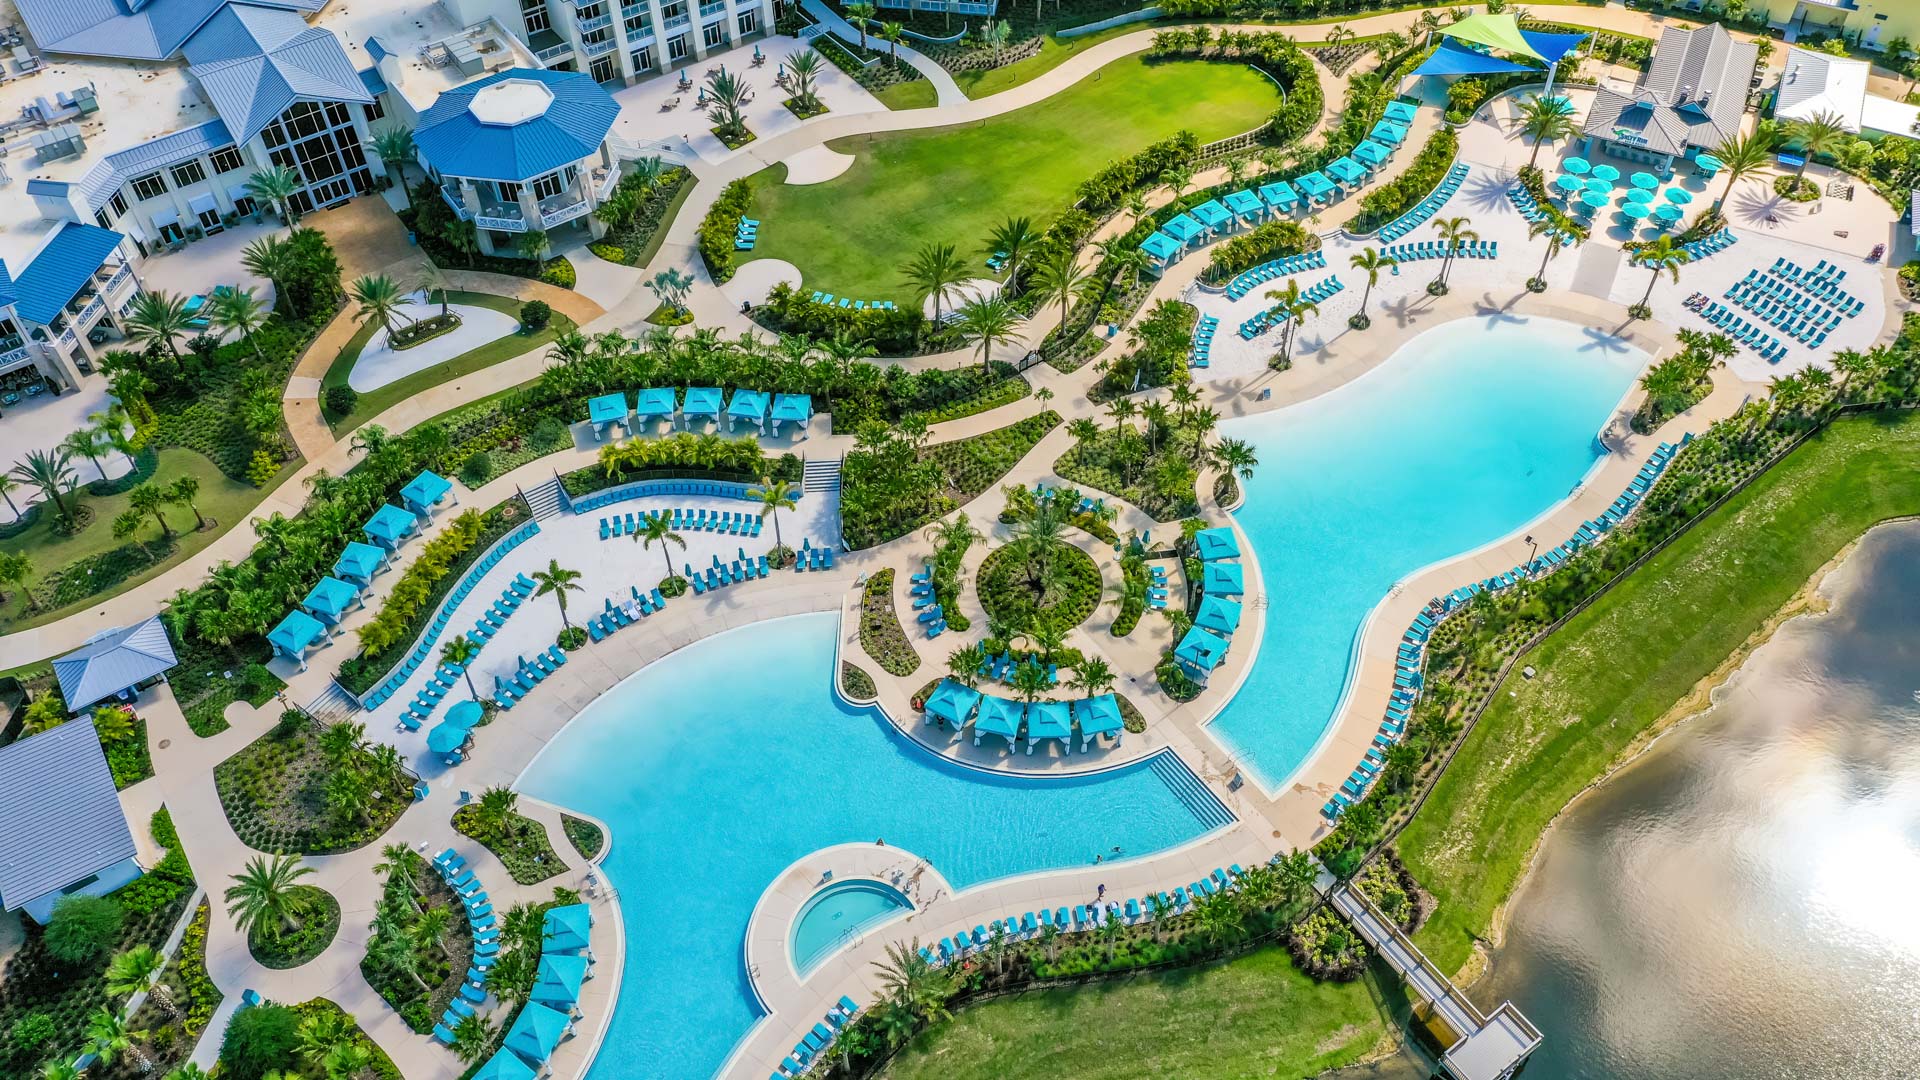 Aerial view of Margaritaville Resort Orlando and its Fins Up Beach Club and pools.